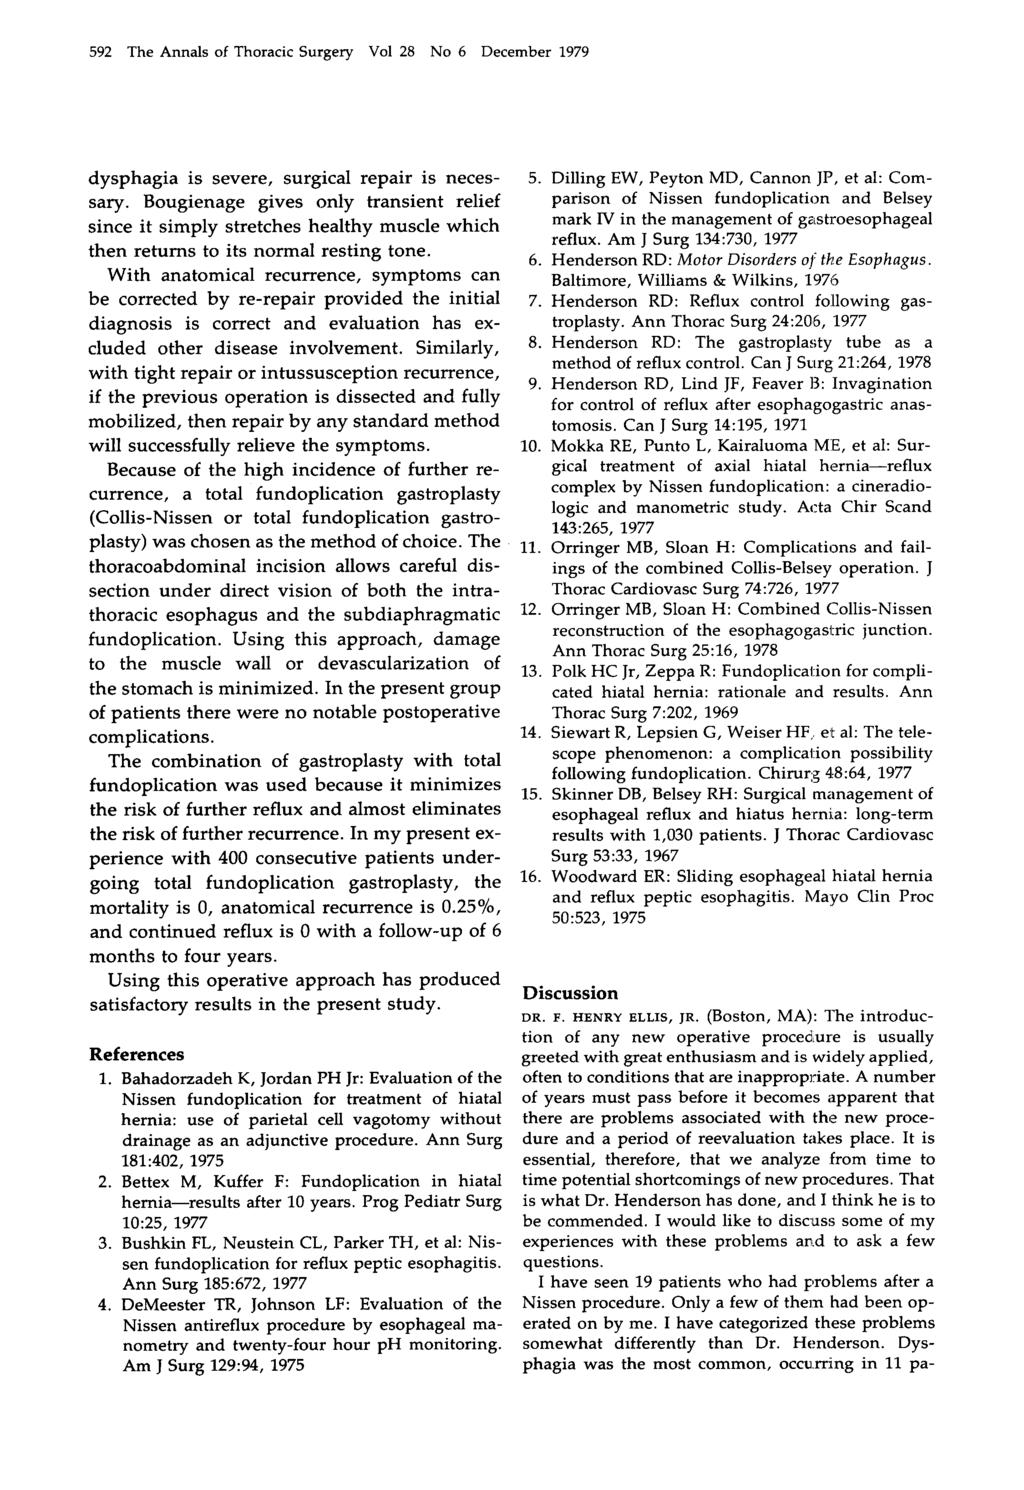 592 The Annals of Thoracic Surgery Vol 28 No 6 December 1979 dysphagia is severe, surgical repair is necessary.